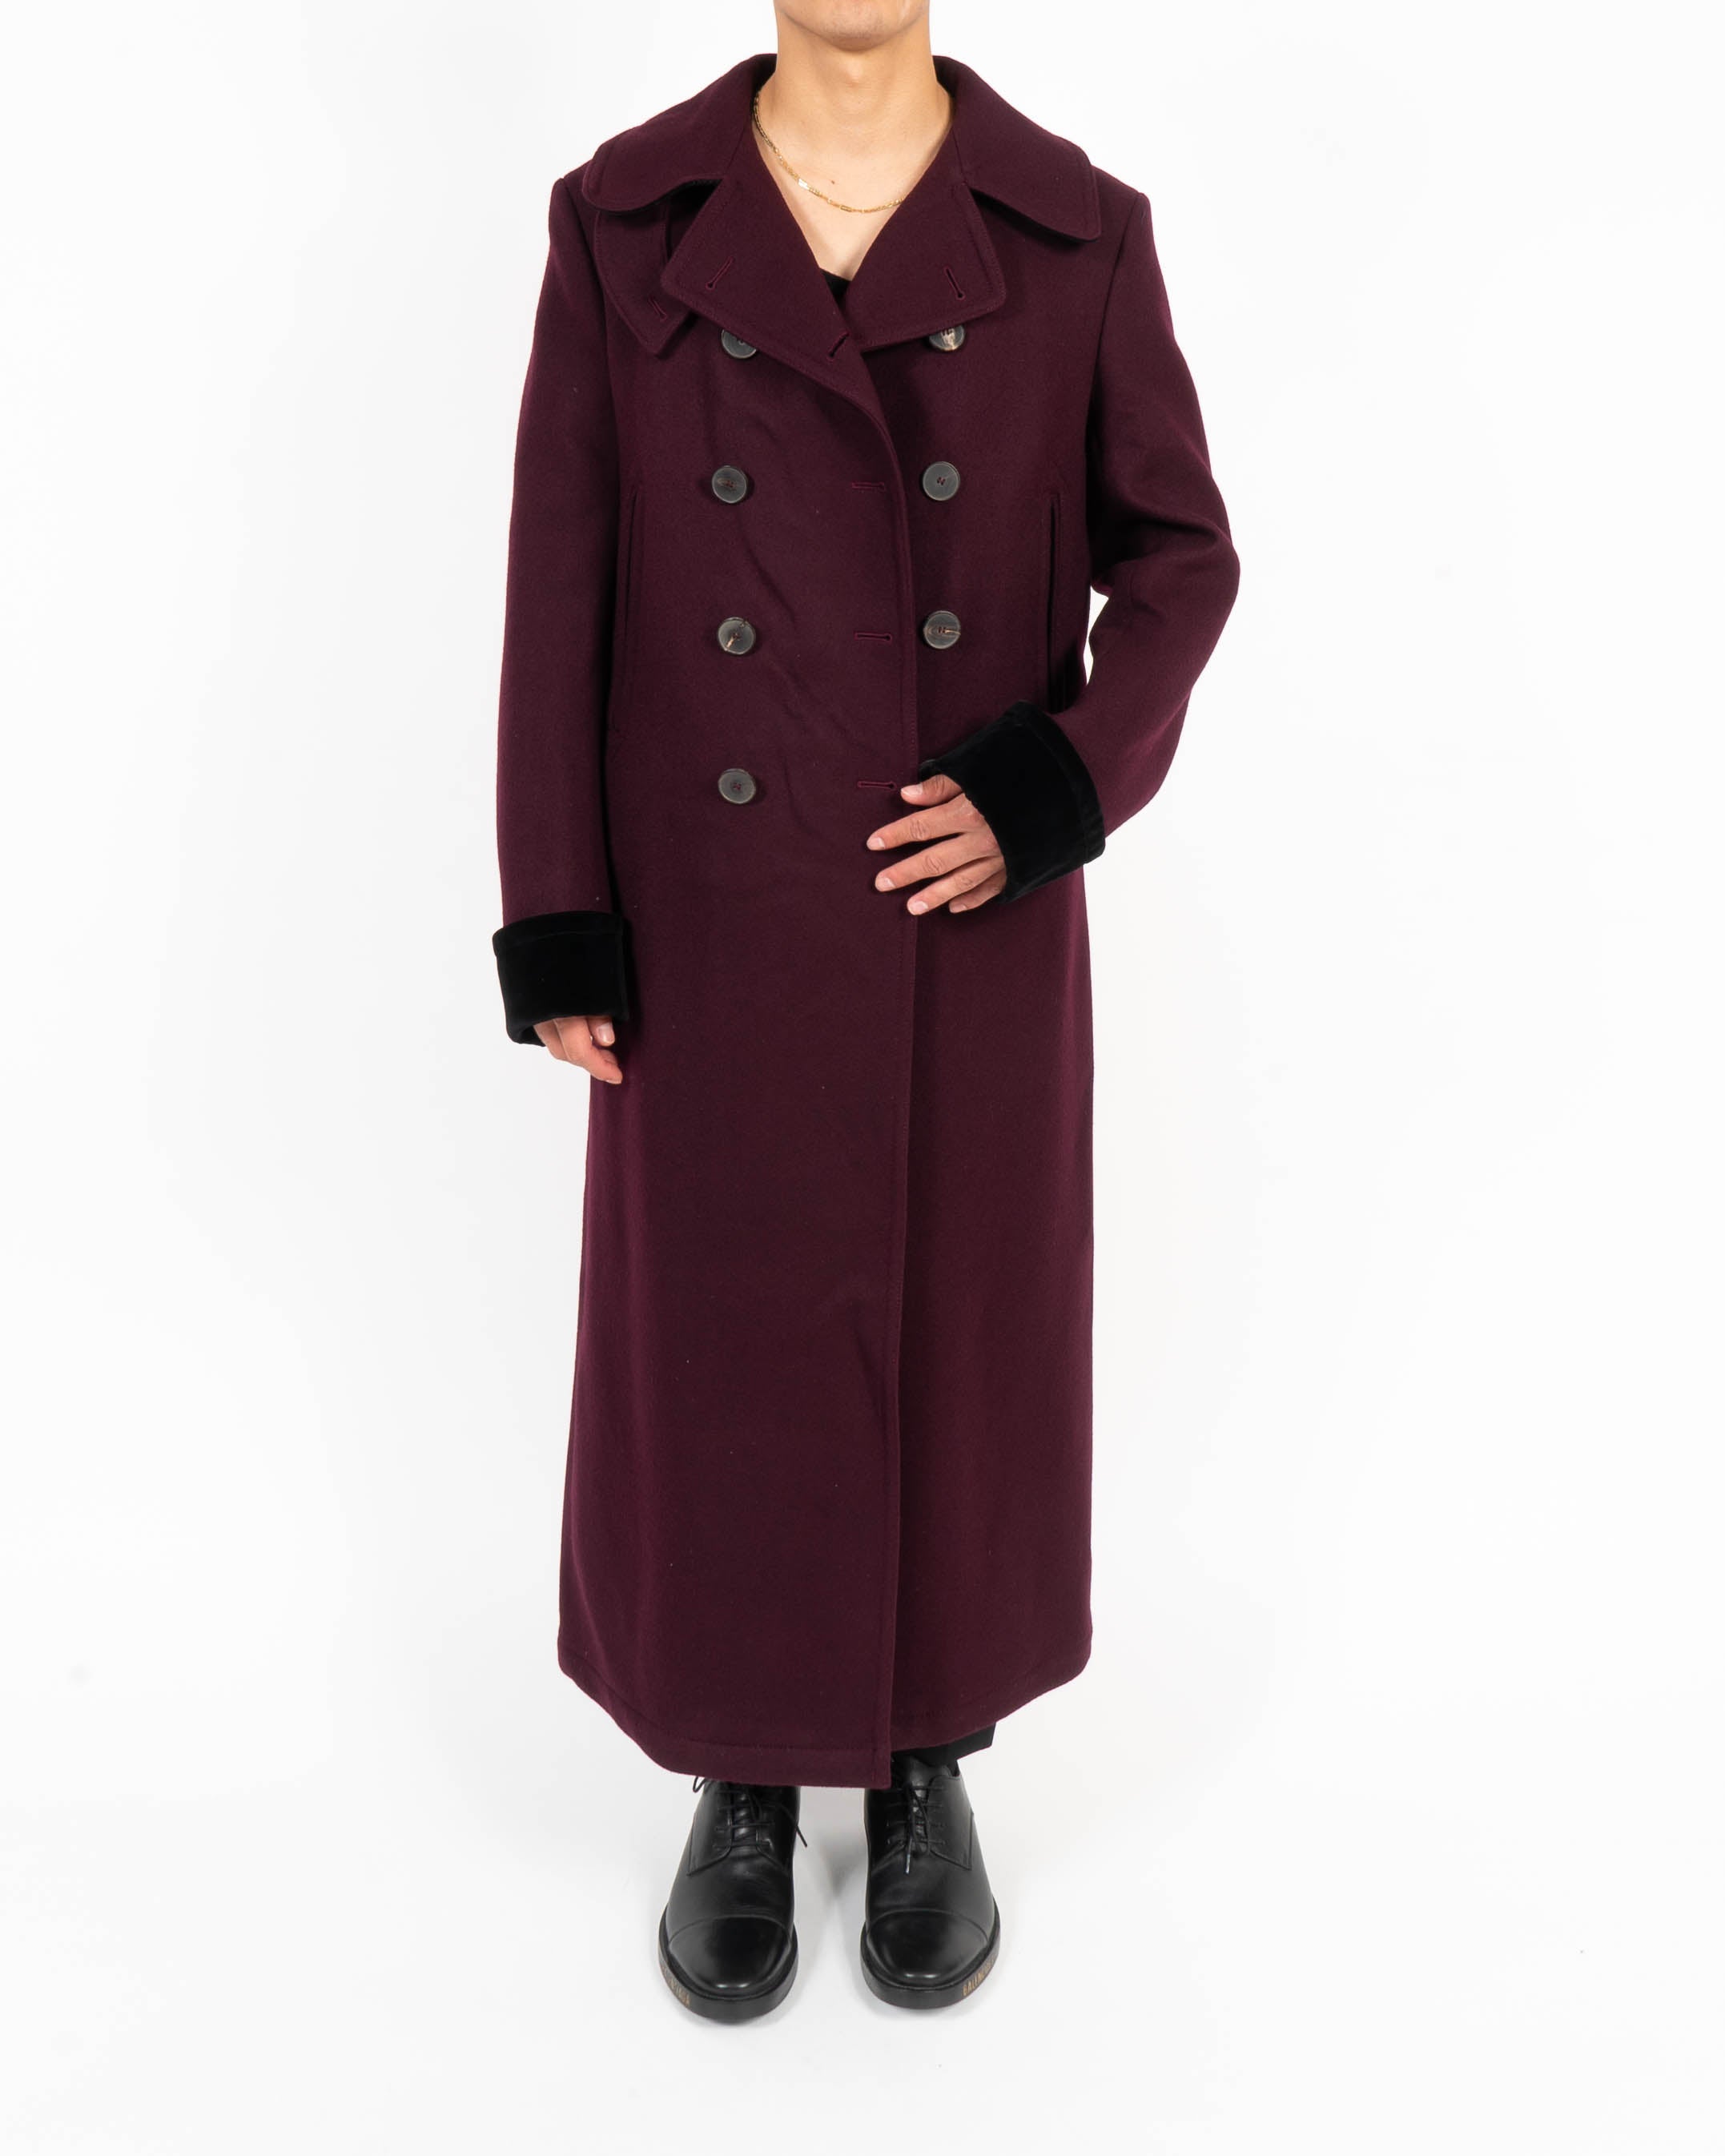 FW17 Oversized Double Breasted Coat in Plum Wool